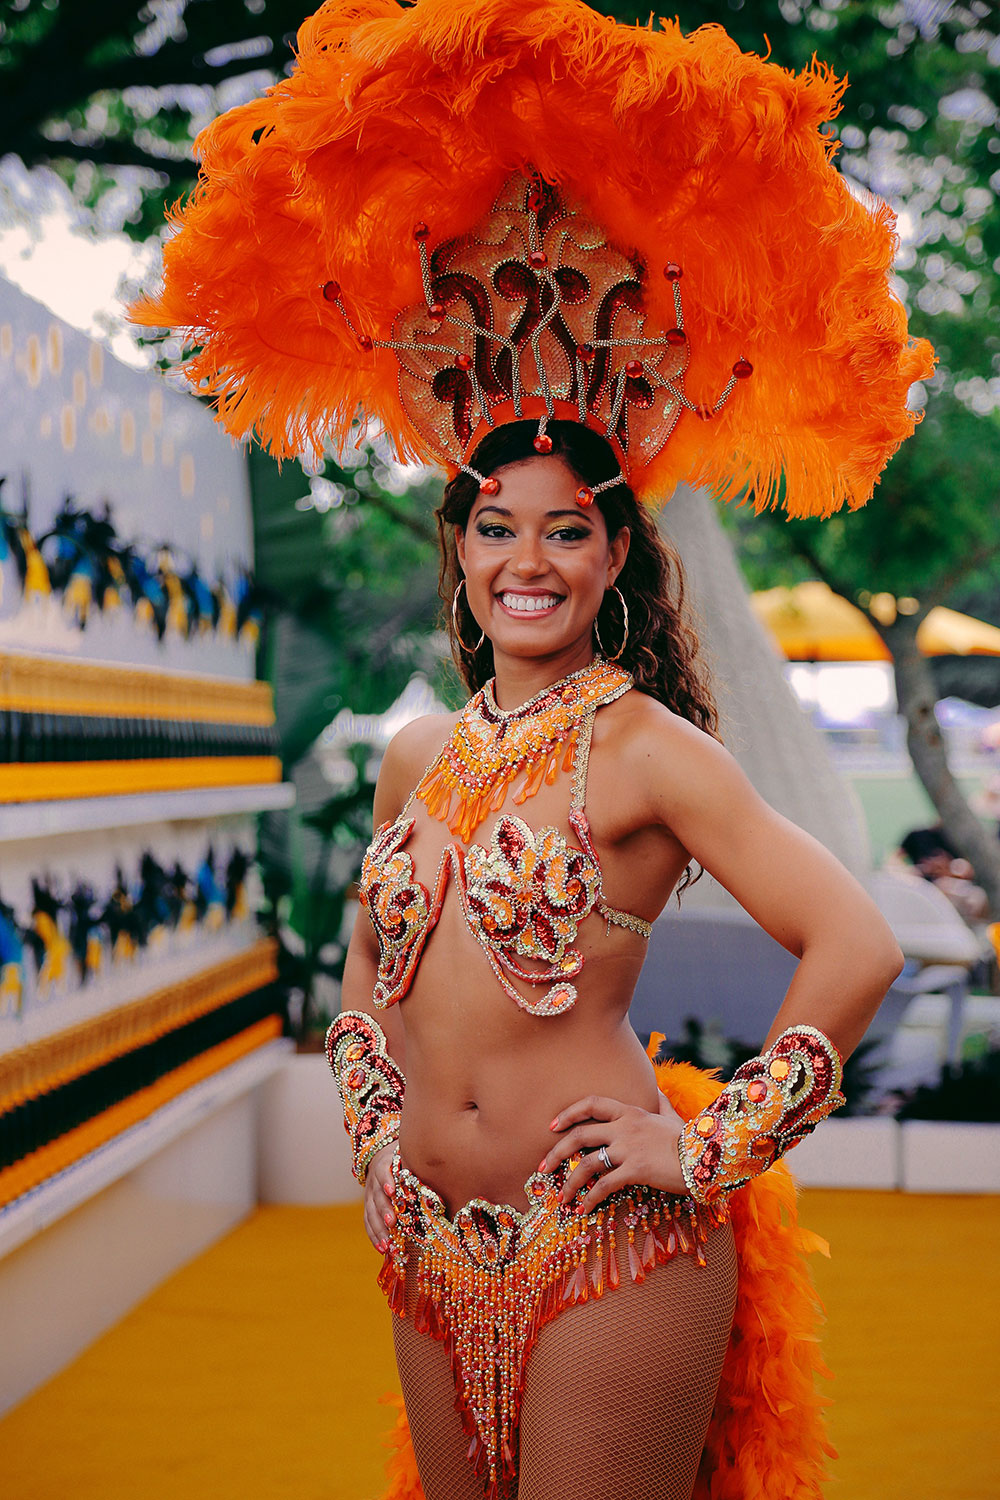 Rio Carnaval girl at the Rio Carnaval-themed Veuve Clicquot marquee.